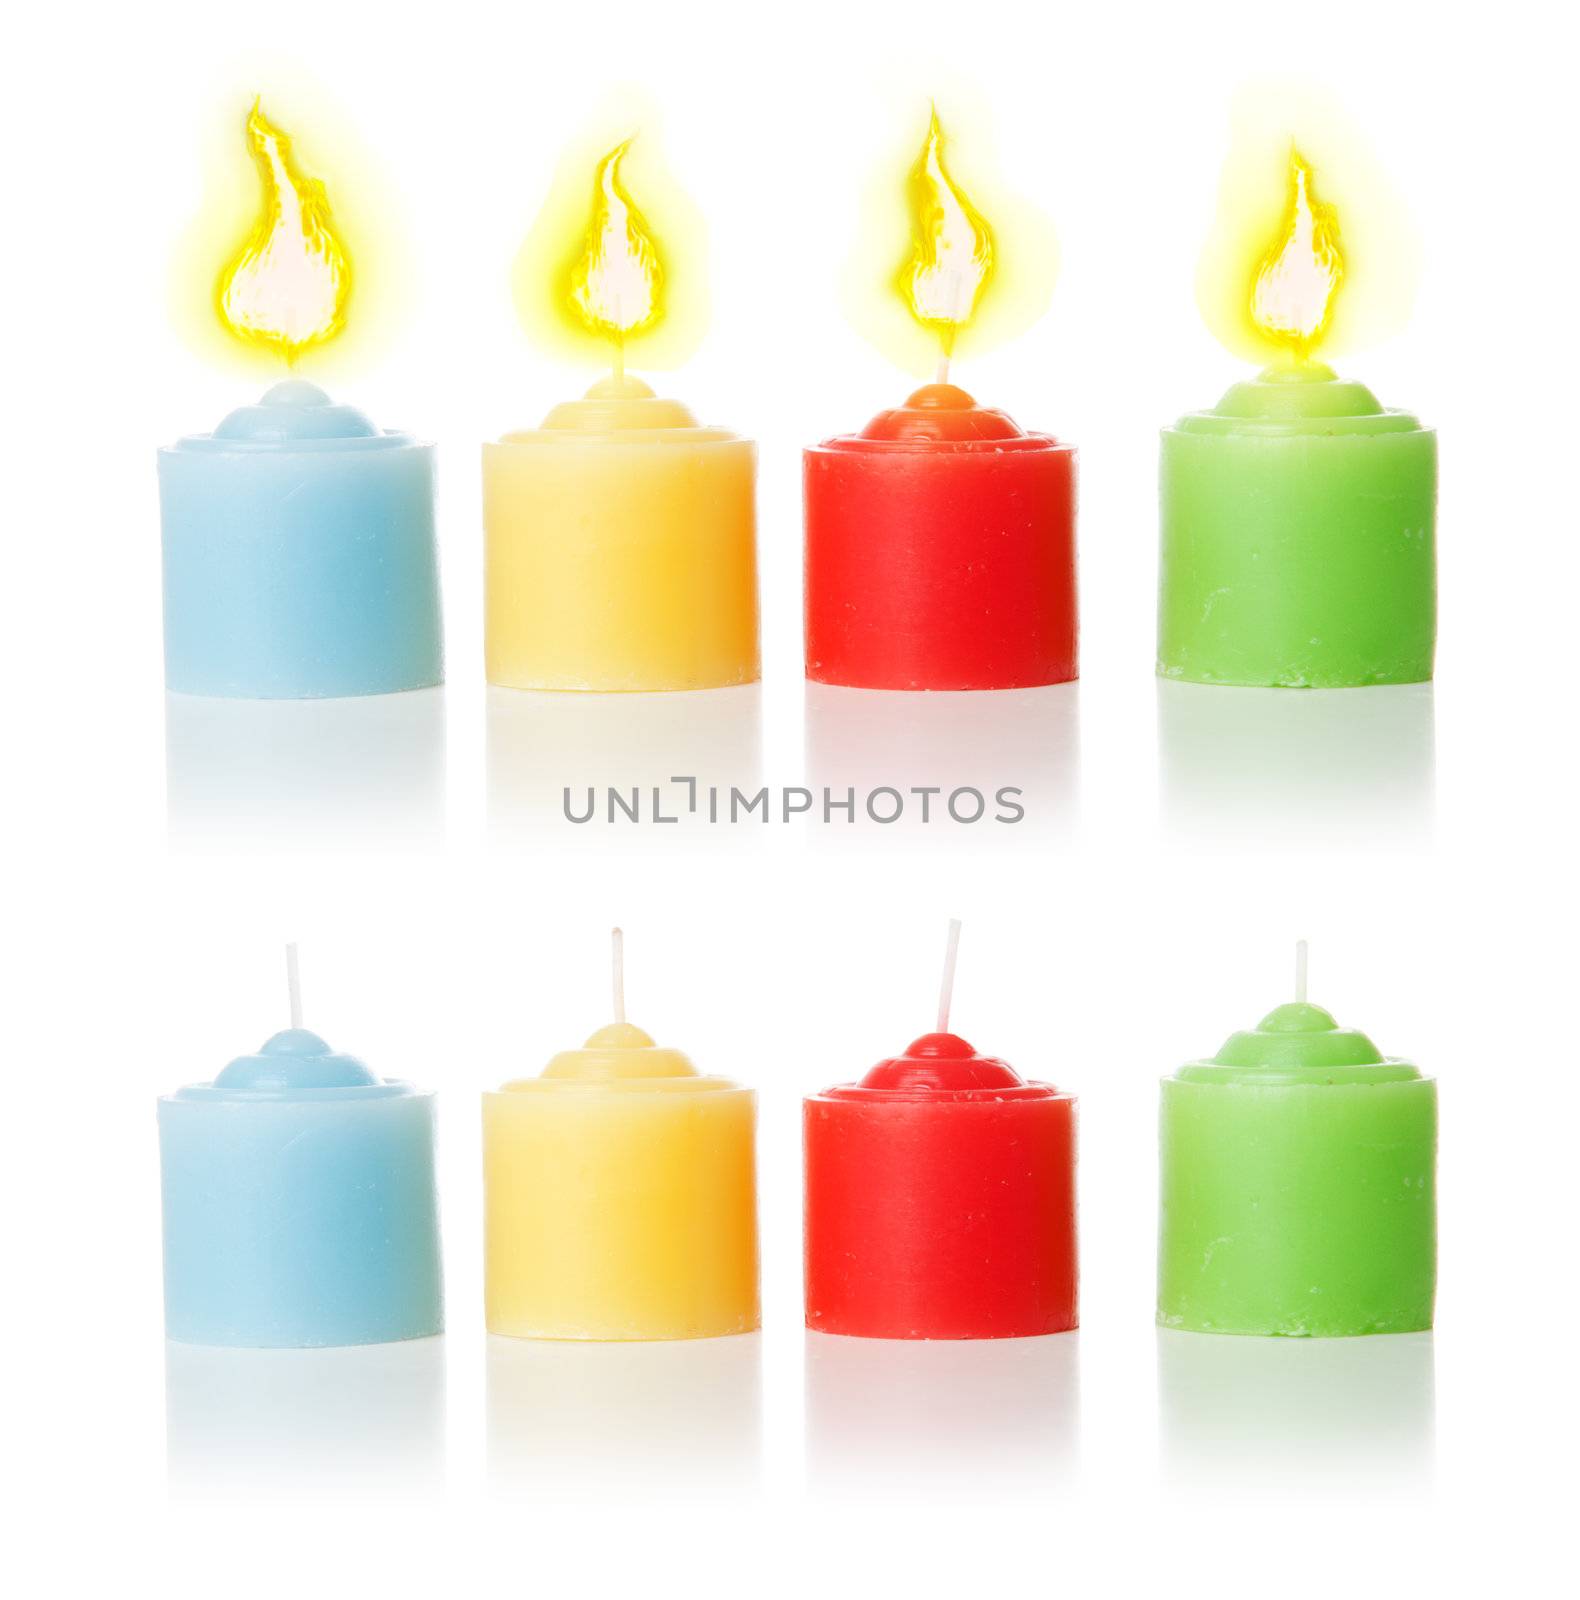 4 colorful candles with candlelight and without it. Isolated over white background